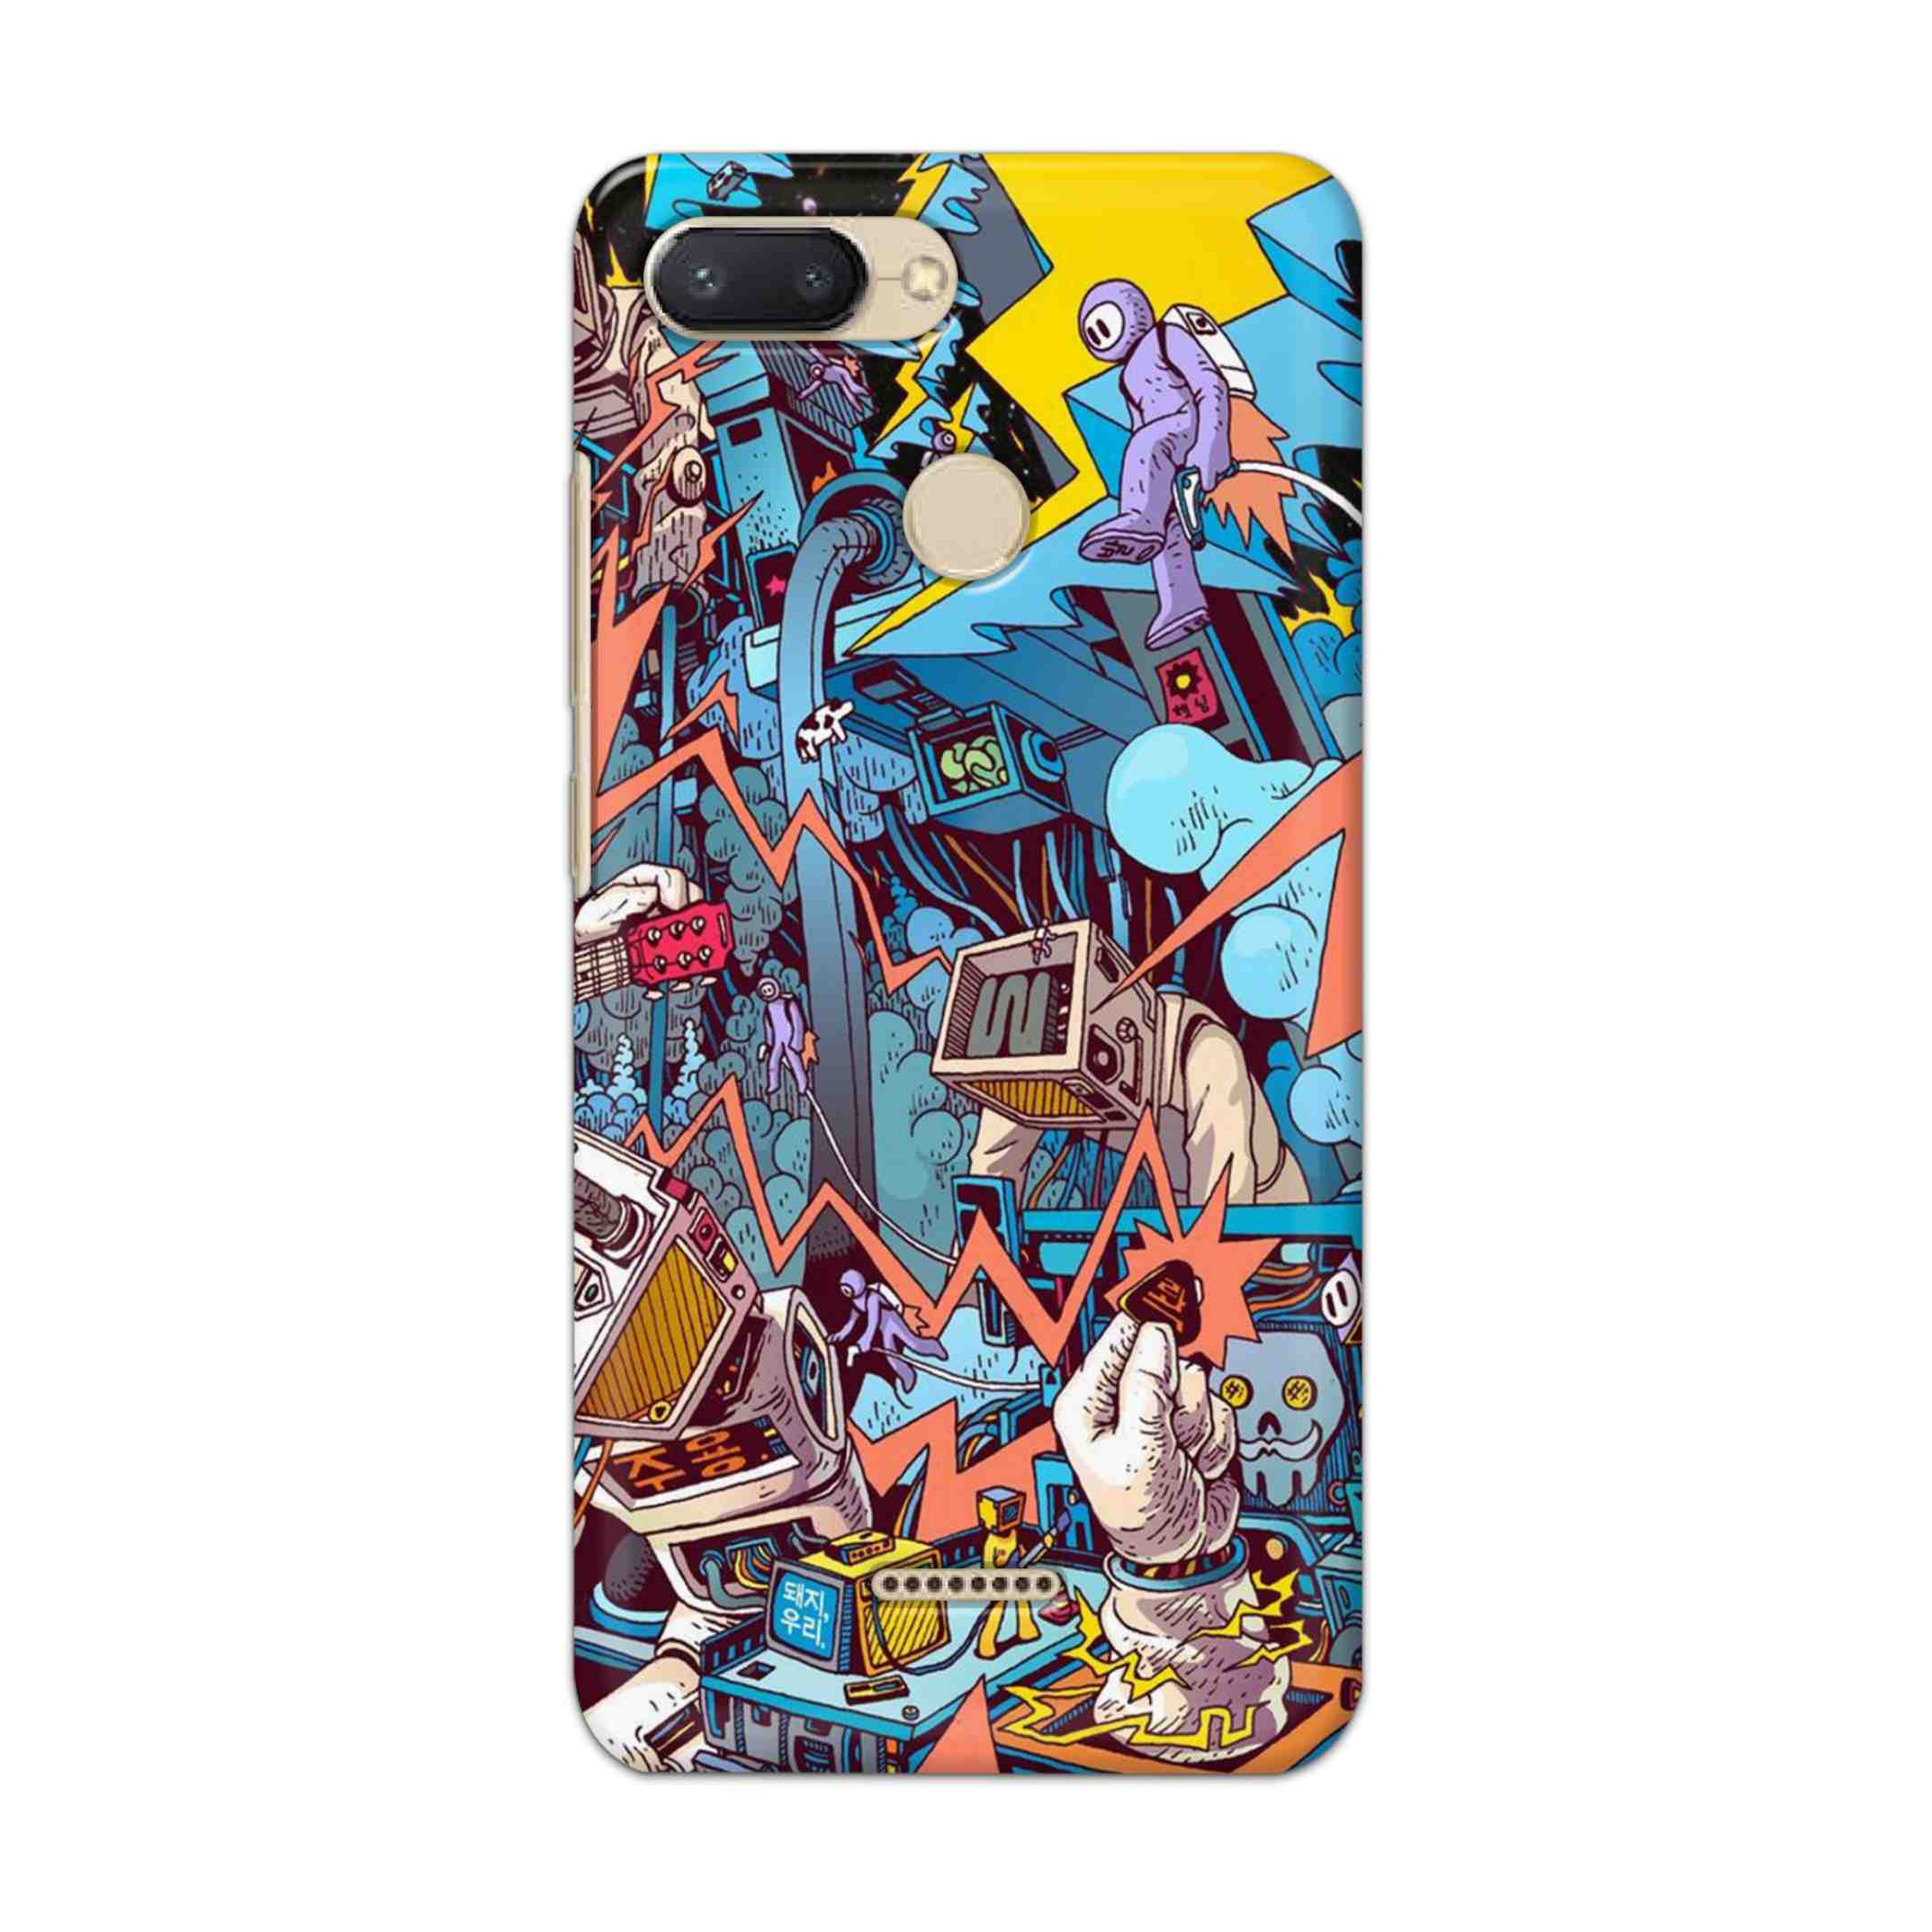 Buy Ofo Panic Hard Back Mobile Phone Case/Cover For Xiaomi Redmi 6 Online